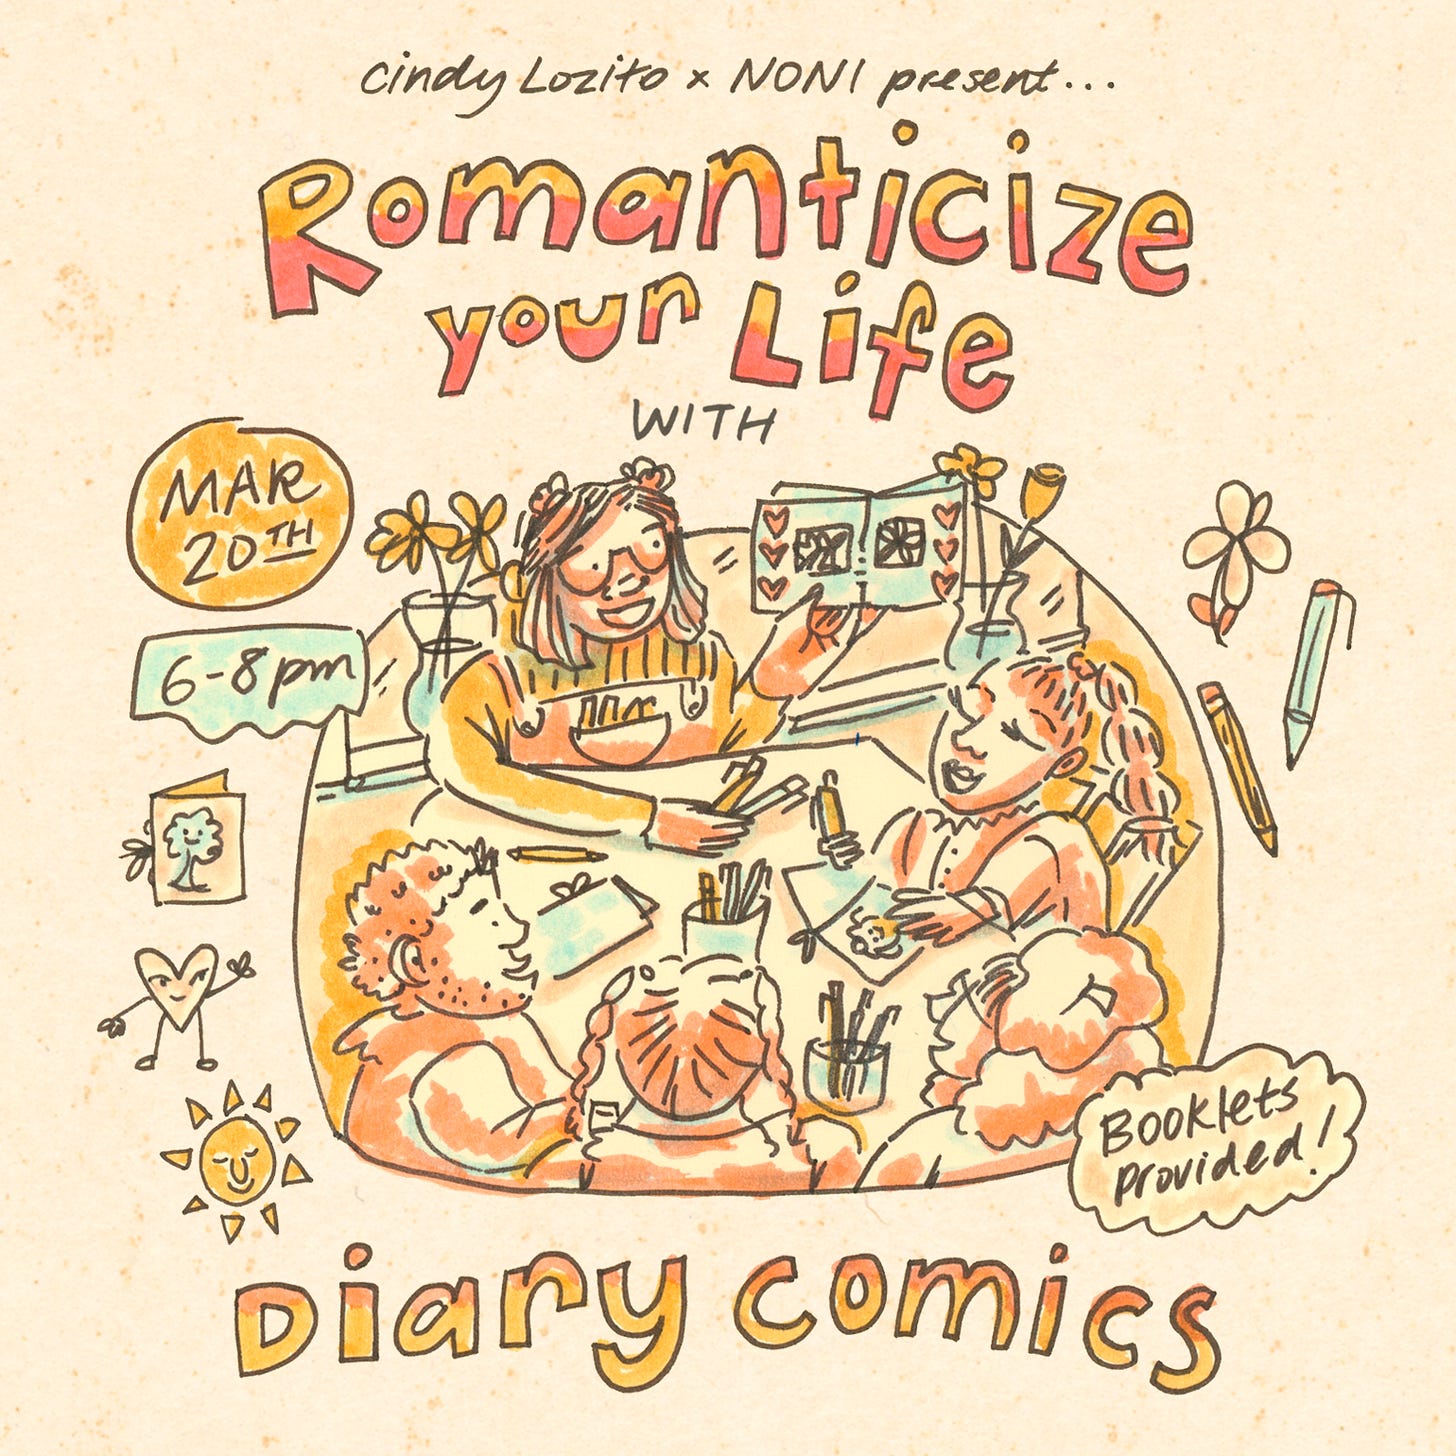 A hand-drawn flyer of a comics workshop that says Cindy Lozito and Noni present, Romanticize your Life with Diary Comics, March 20th, 6 to 8pm, booklets provided.